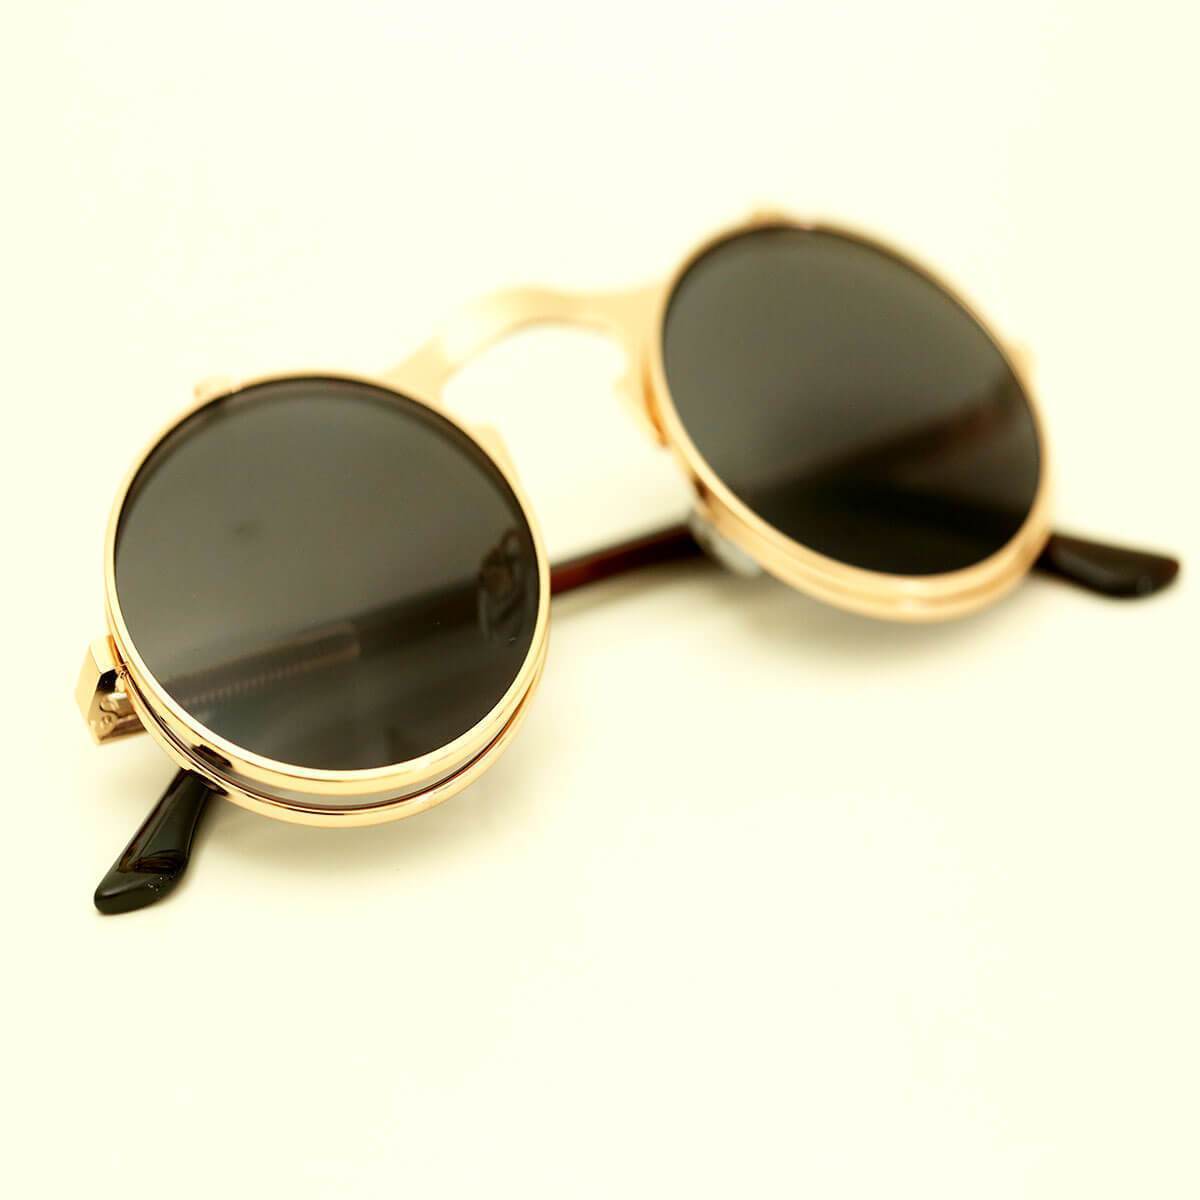  Dollger Double Lens Clip On Sunglasses Non-flip Lens Round  Steampunk Style Glasses for Men Women : Clothing, Shoes & Jewelry